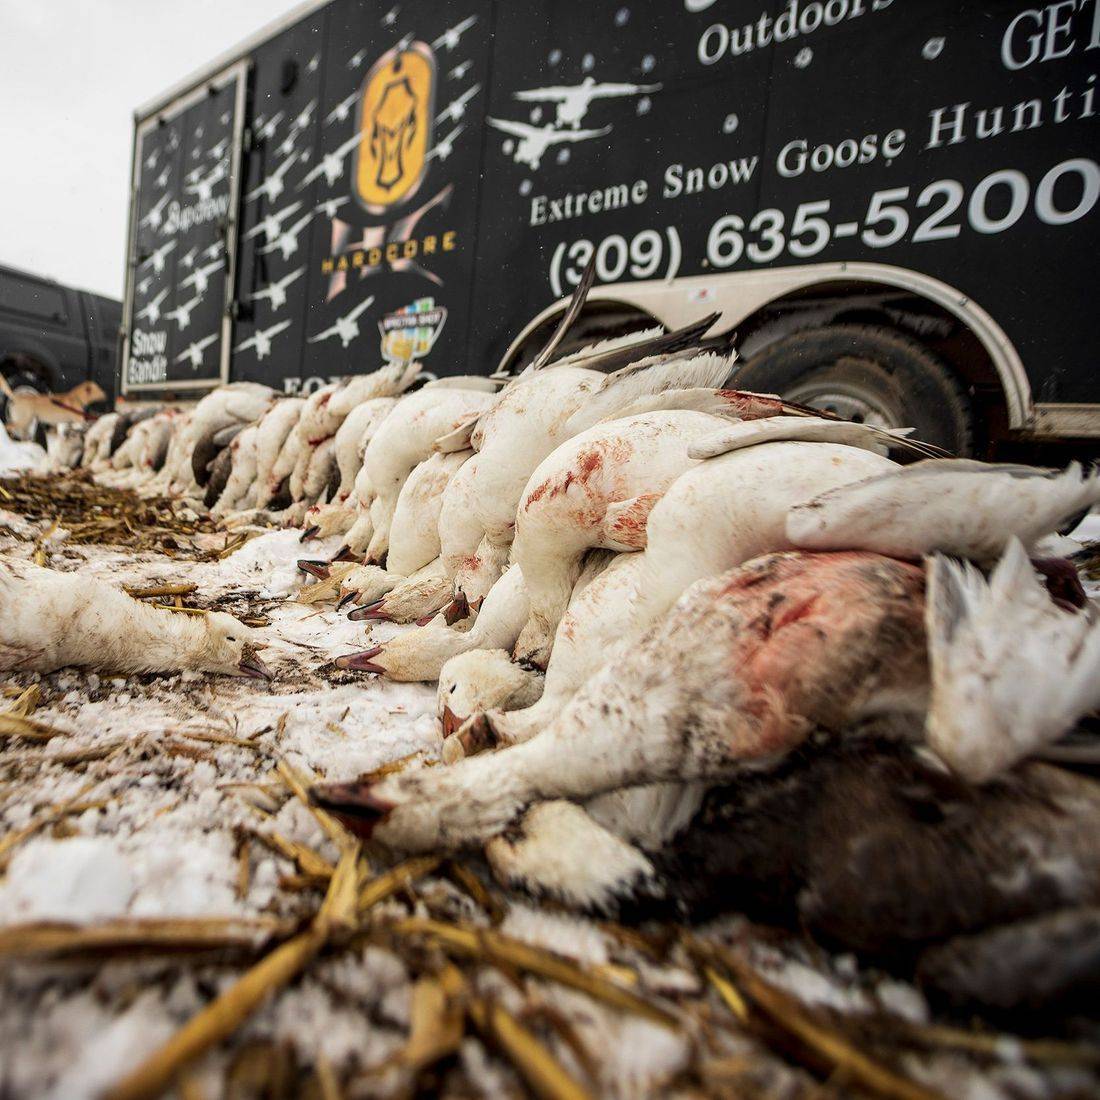 Spring Snow Goose Hunt with Lodging